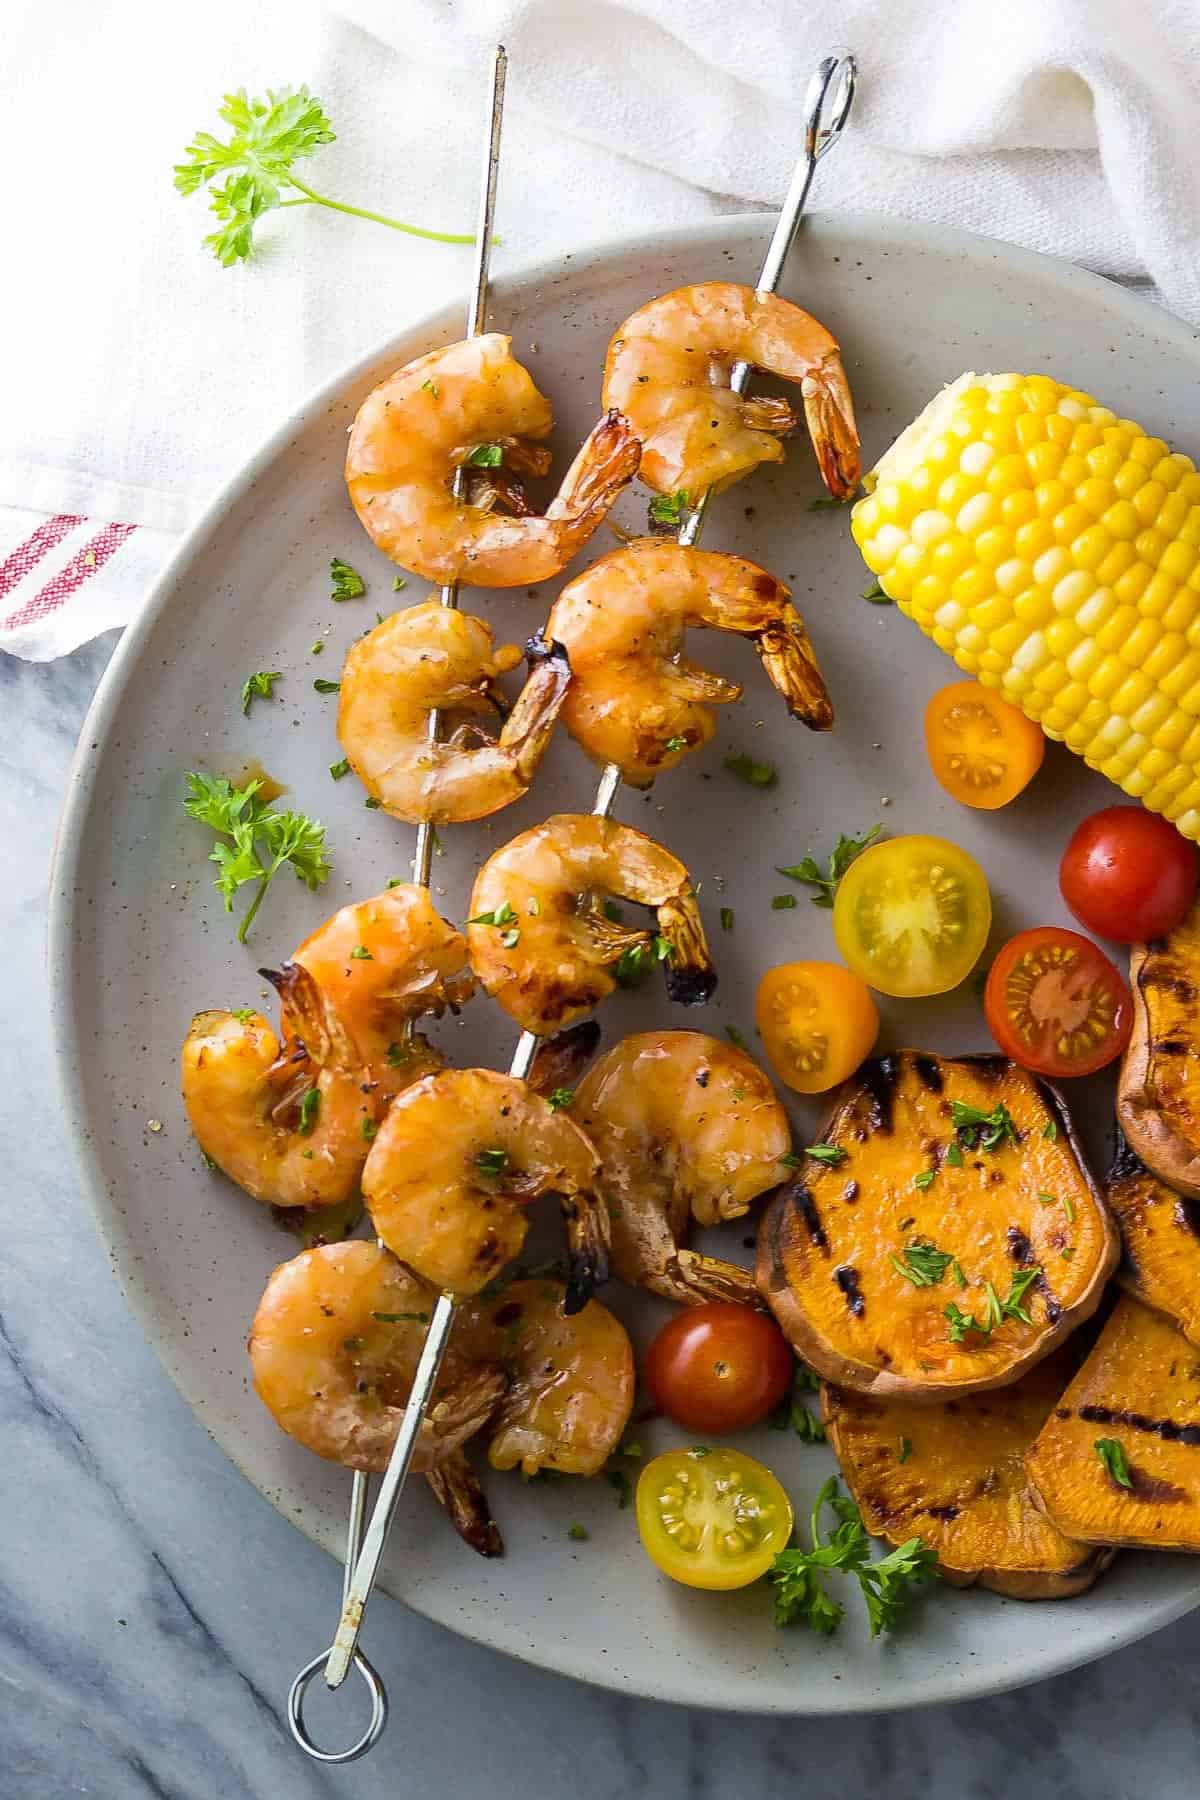 Chipotle Grilled Shrimp Skewers on plate with grilled sweet potatoes, corn and tomatoes